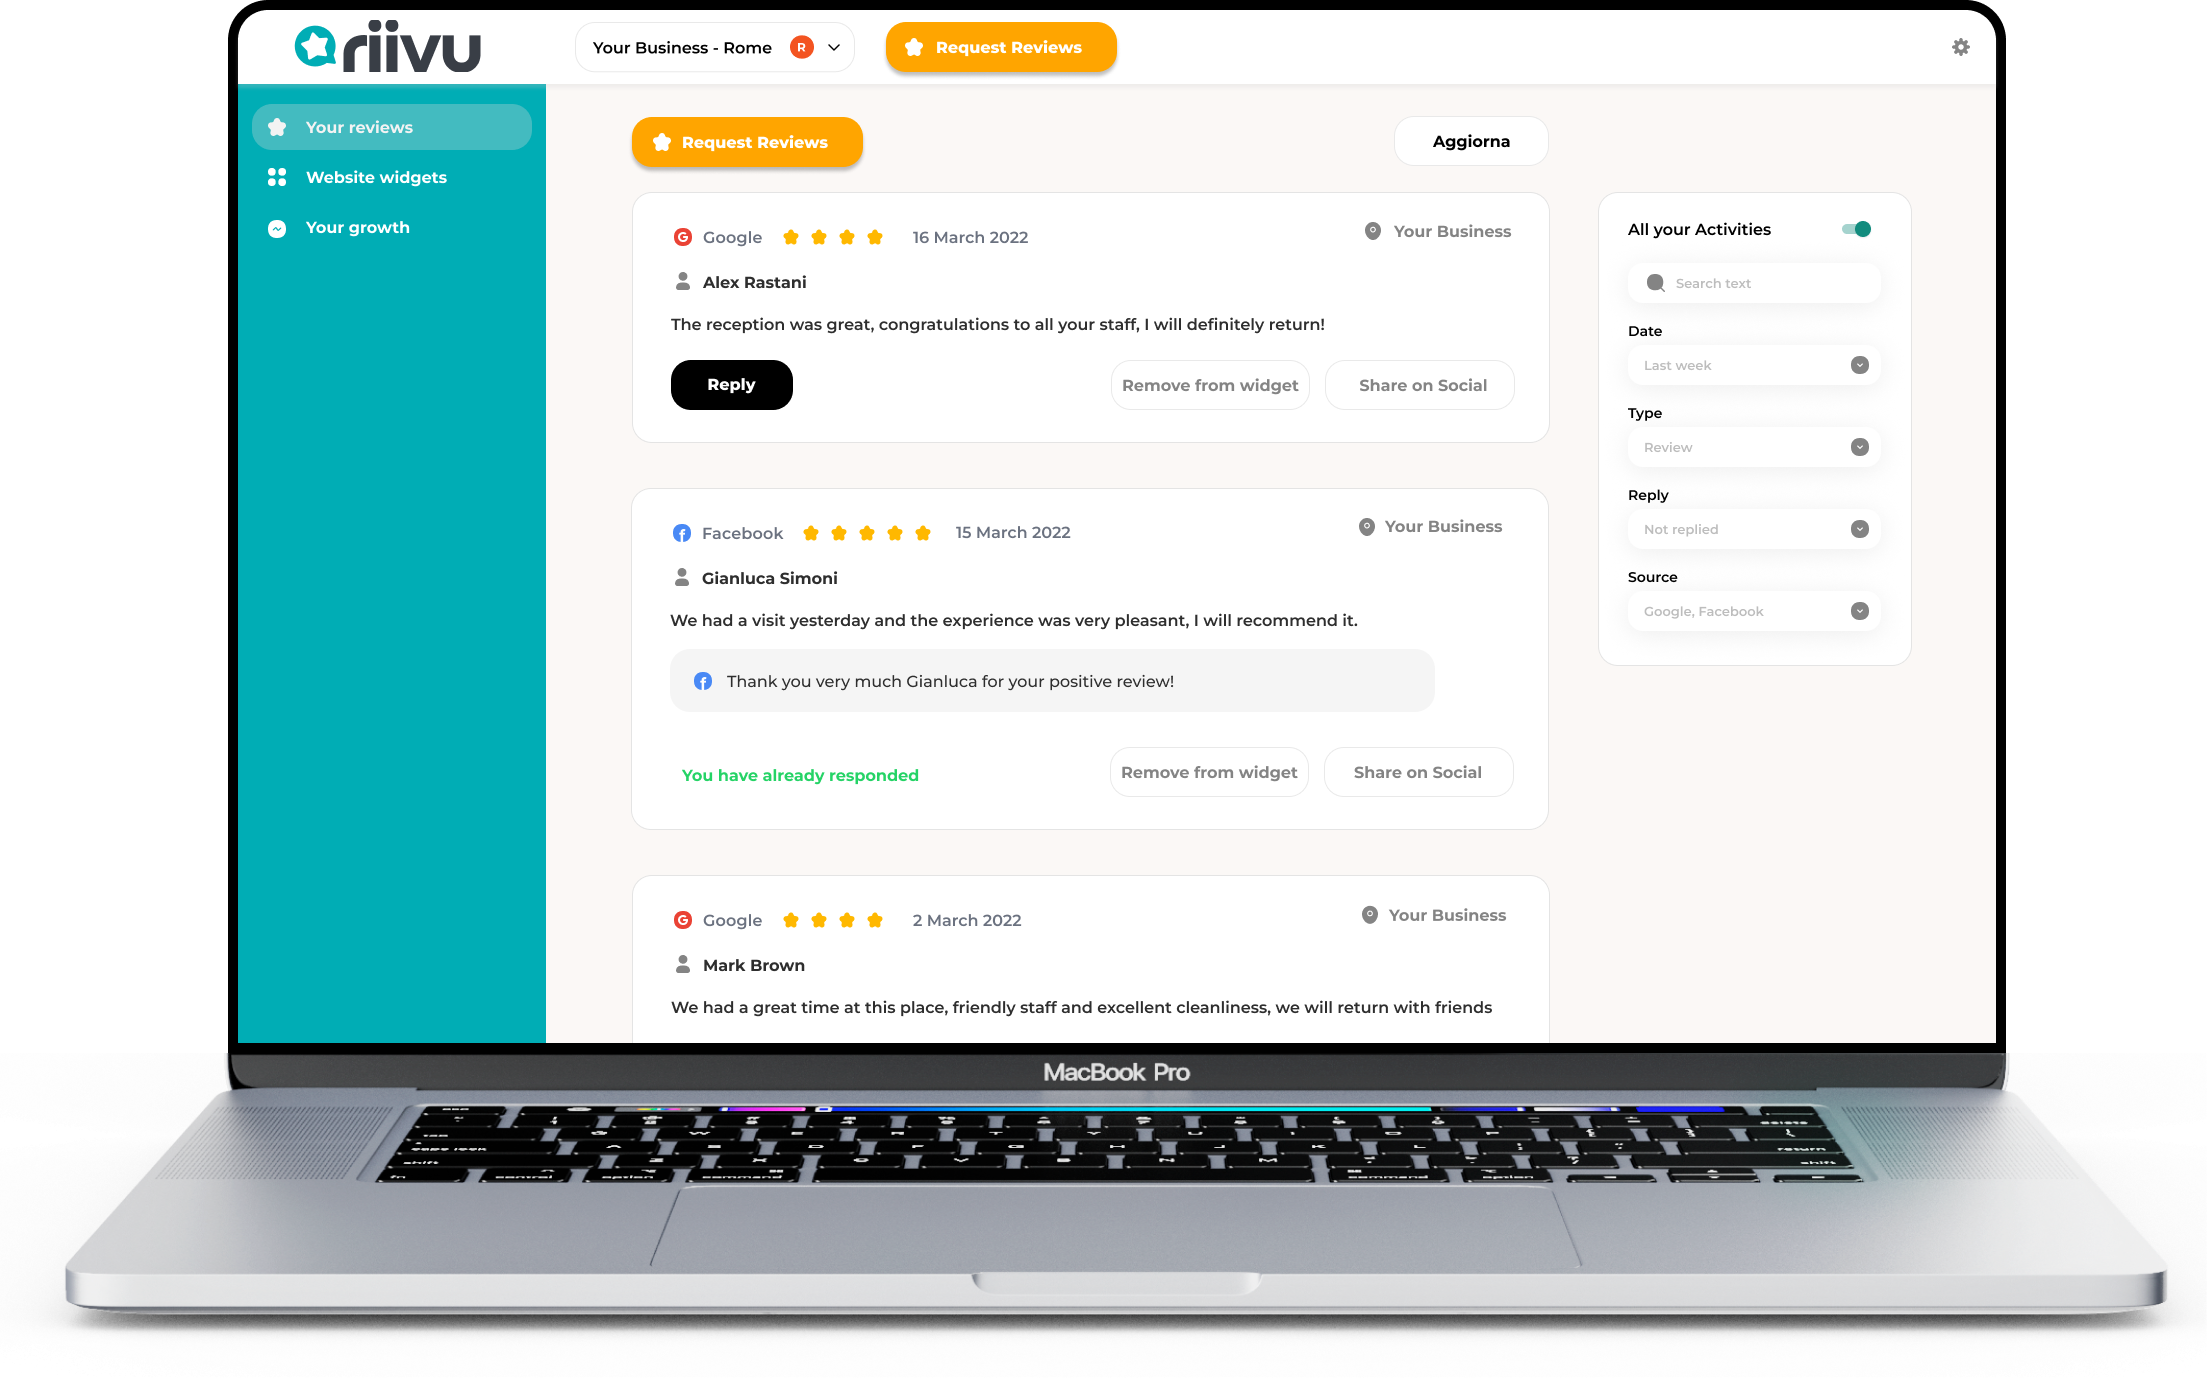 Easy to Use Dashboard for Managing Reviews